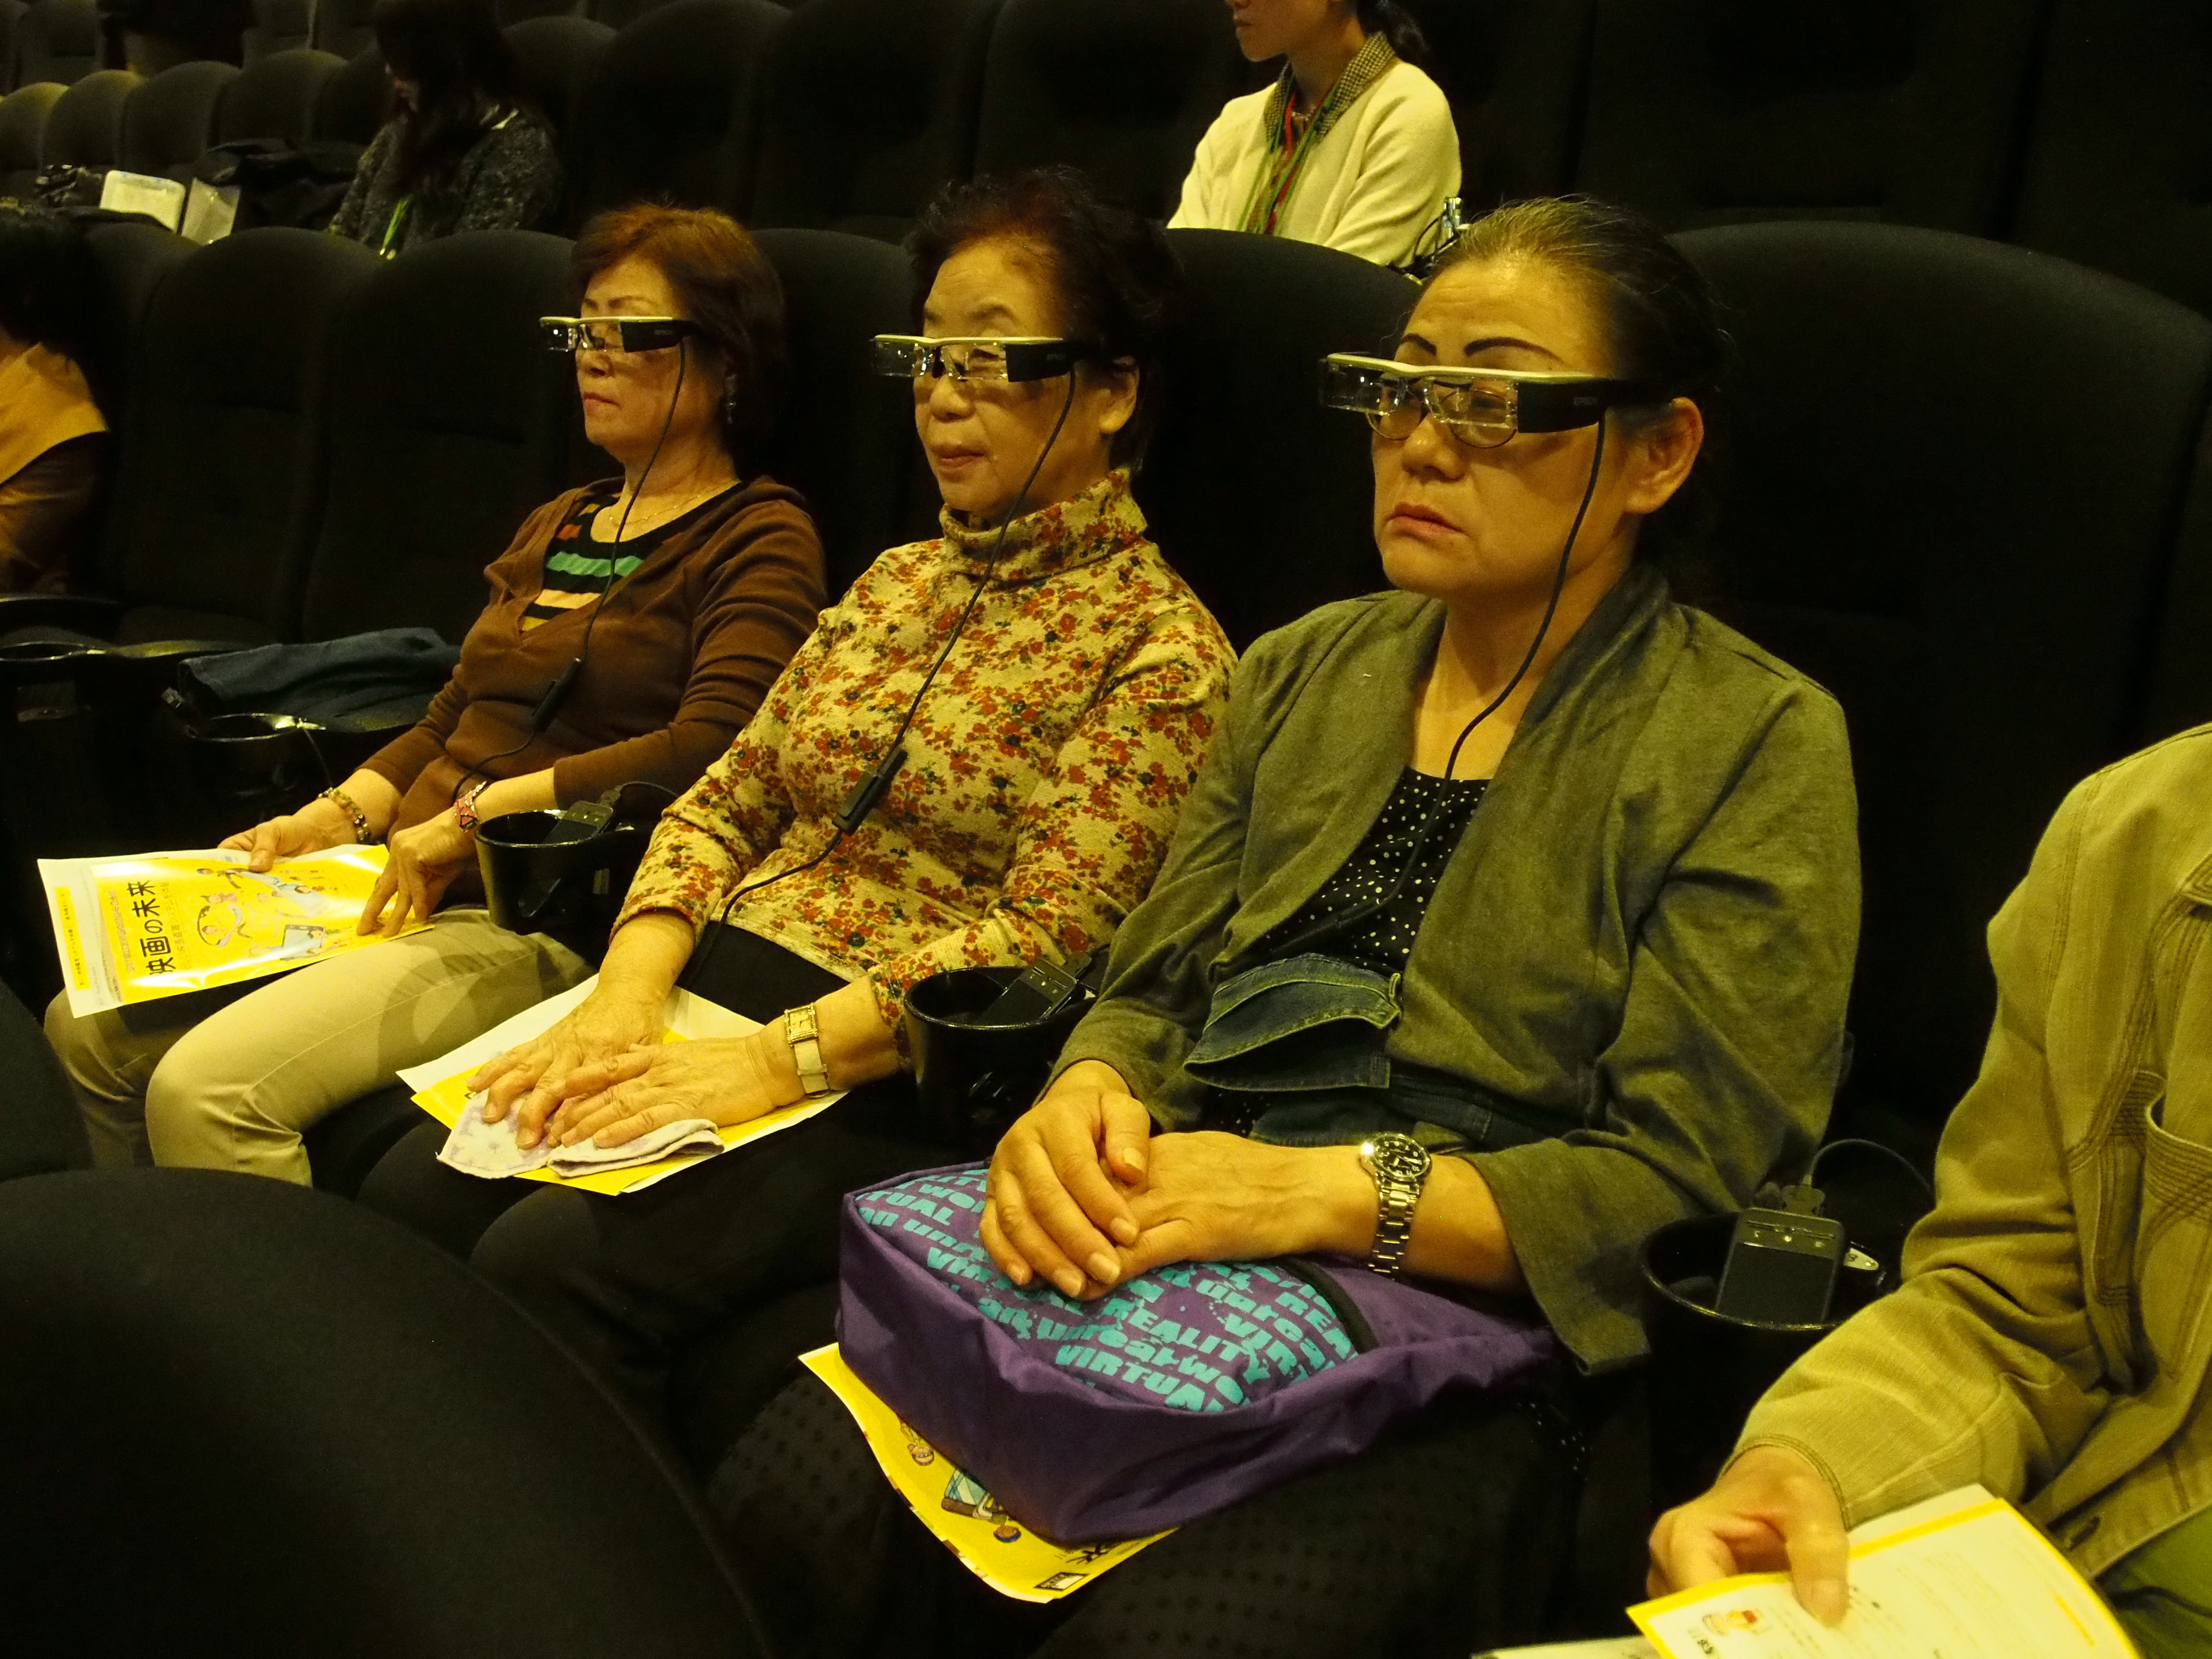 Sound and vision: A new type of head-mounted technology offers personal subtitles and descriptive audio for aurally and visually impaired moviegoers. | MASAMI ITO